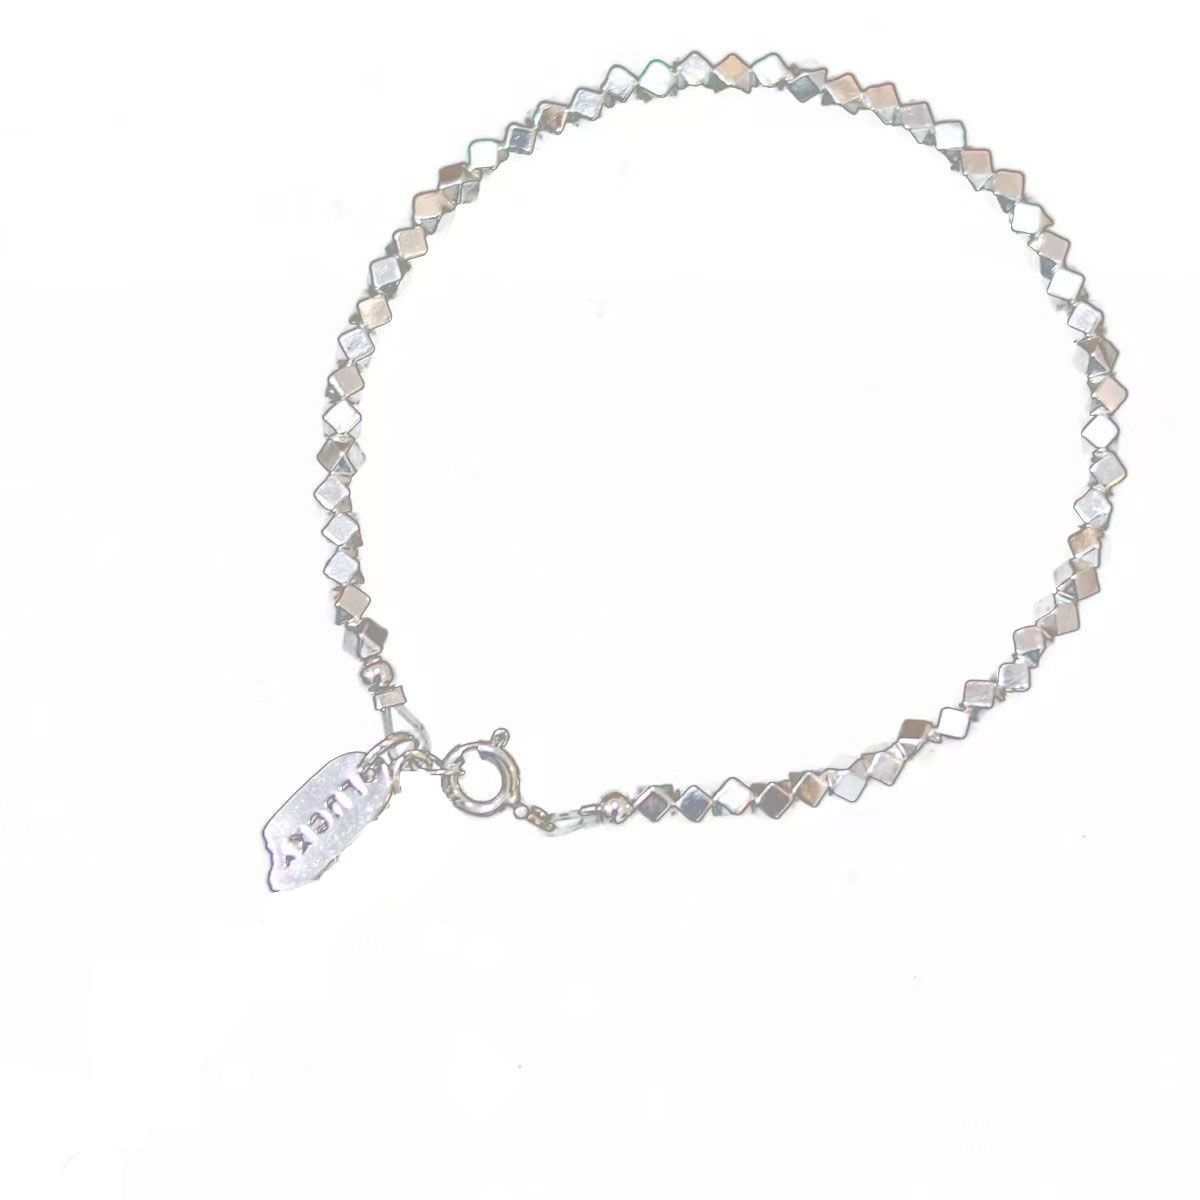 Shining Sterling Silver Does Not Fade! Small Pieces of Silver Couple 925 Bracelet Female Girlfriend Gifts Light Luxury Ins Special-Interest Design